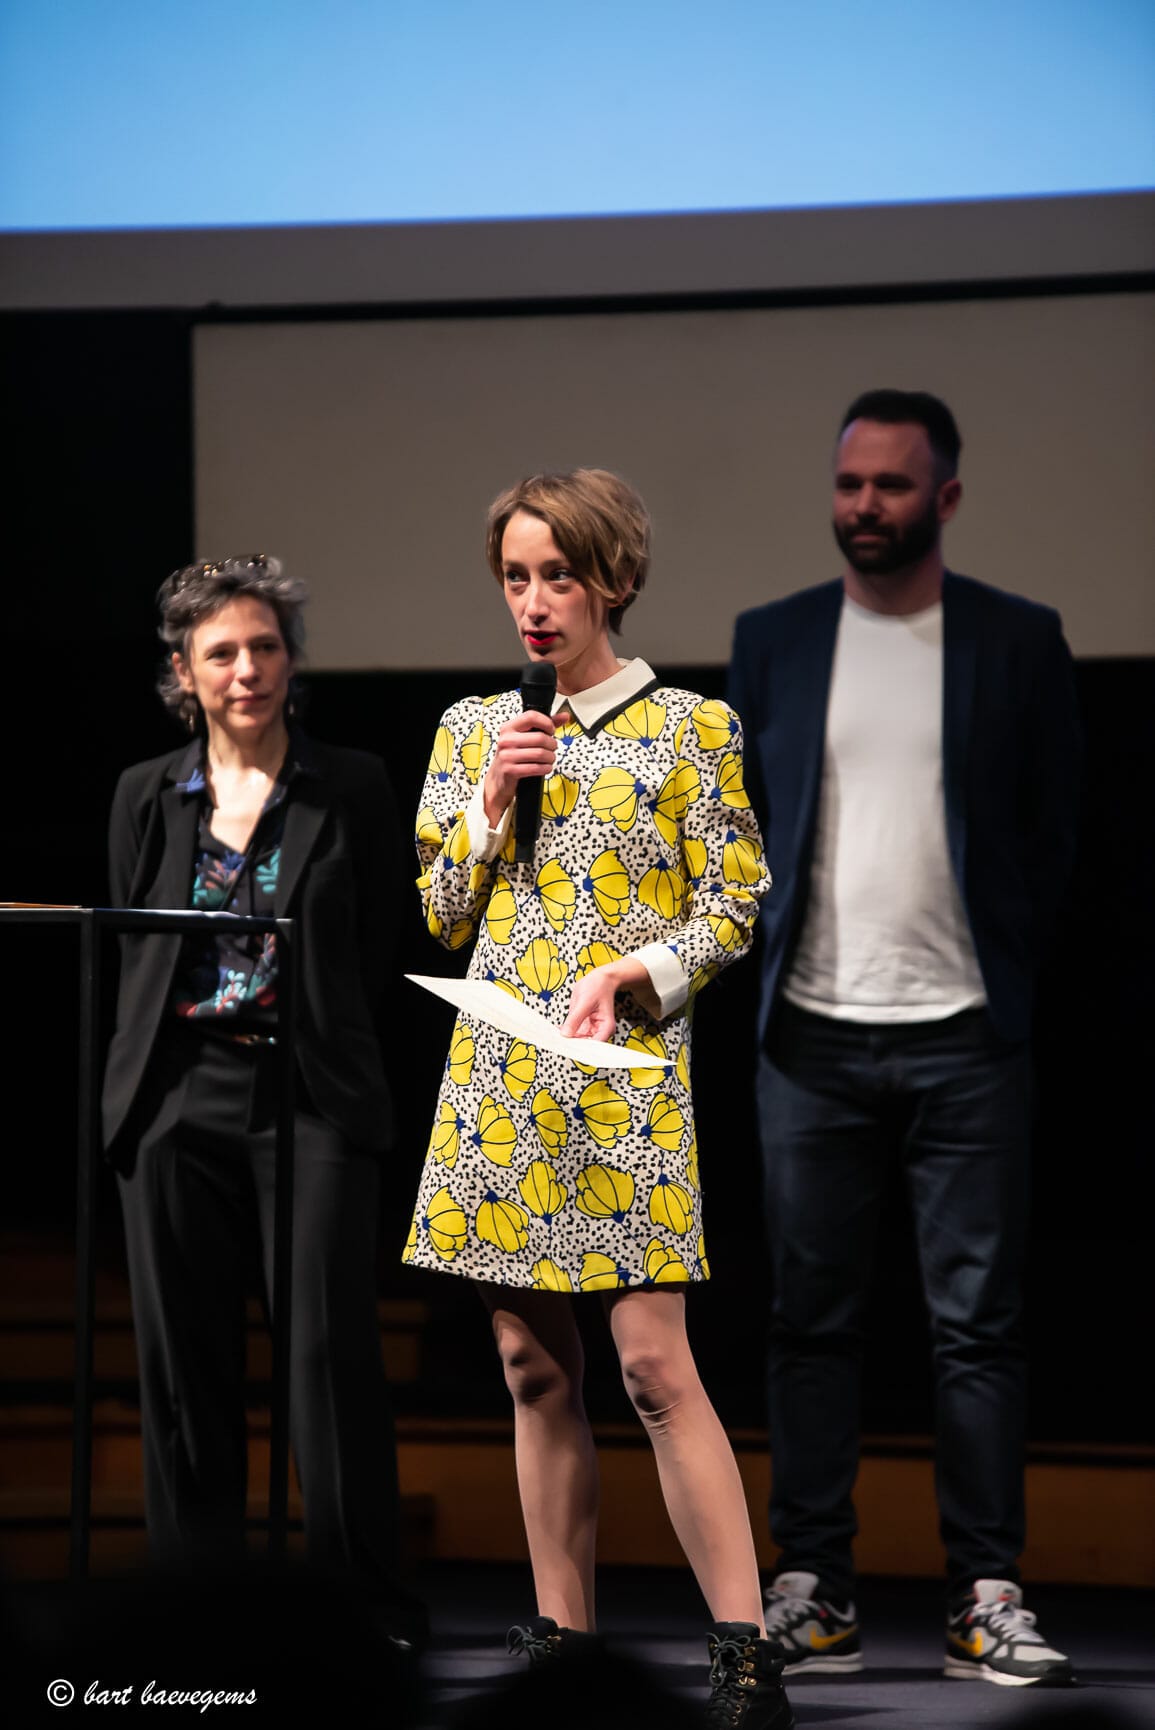 BSFF 2023 - Day 11 - Closing Ceremony - Director Sophie Maréchal (National Audience Award)